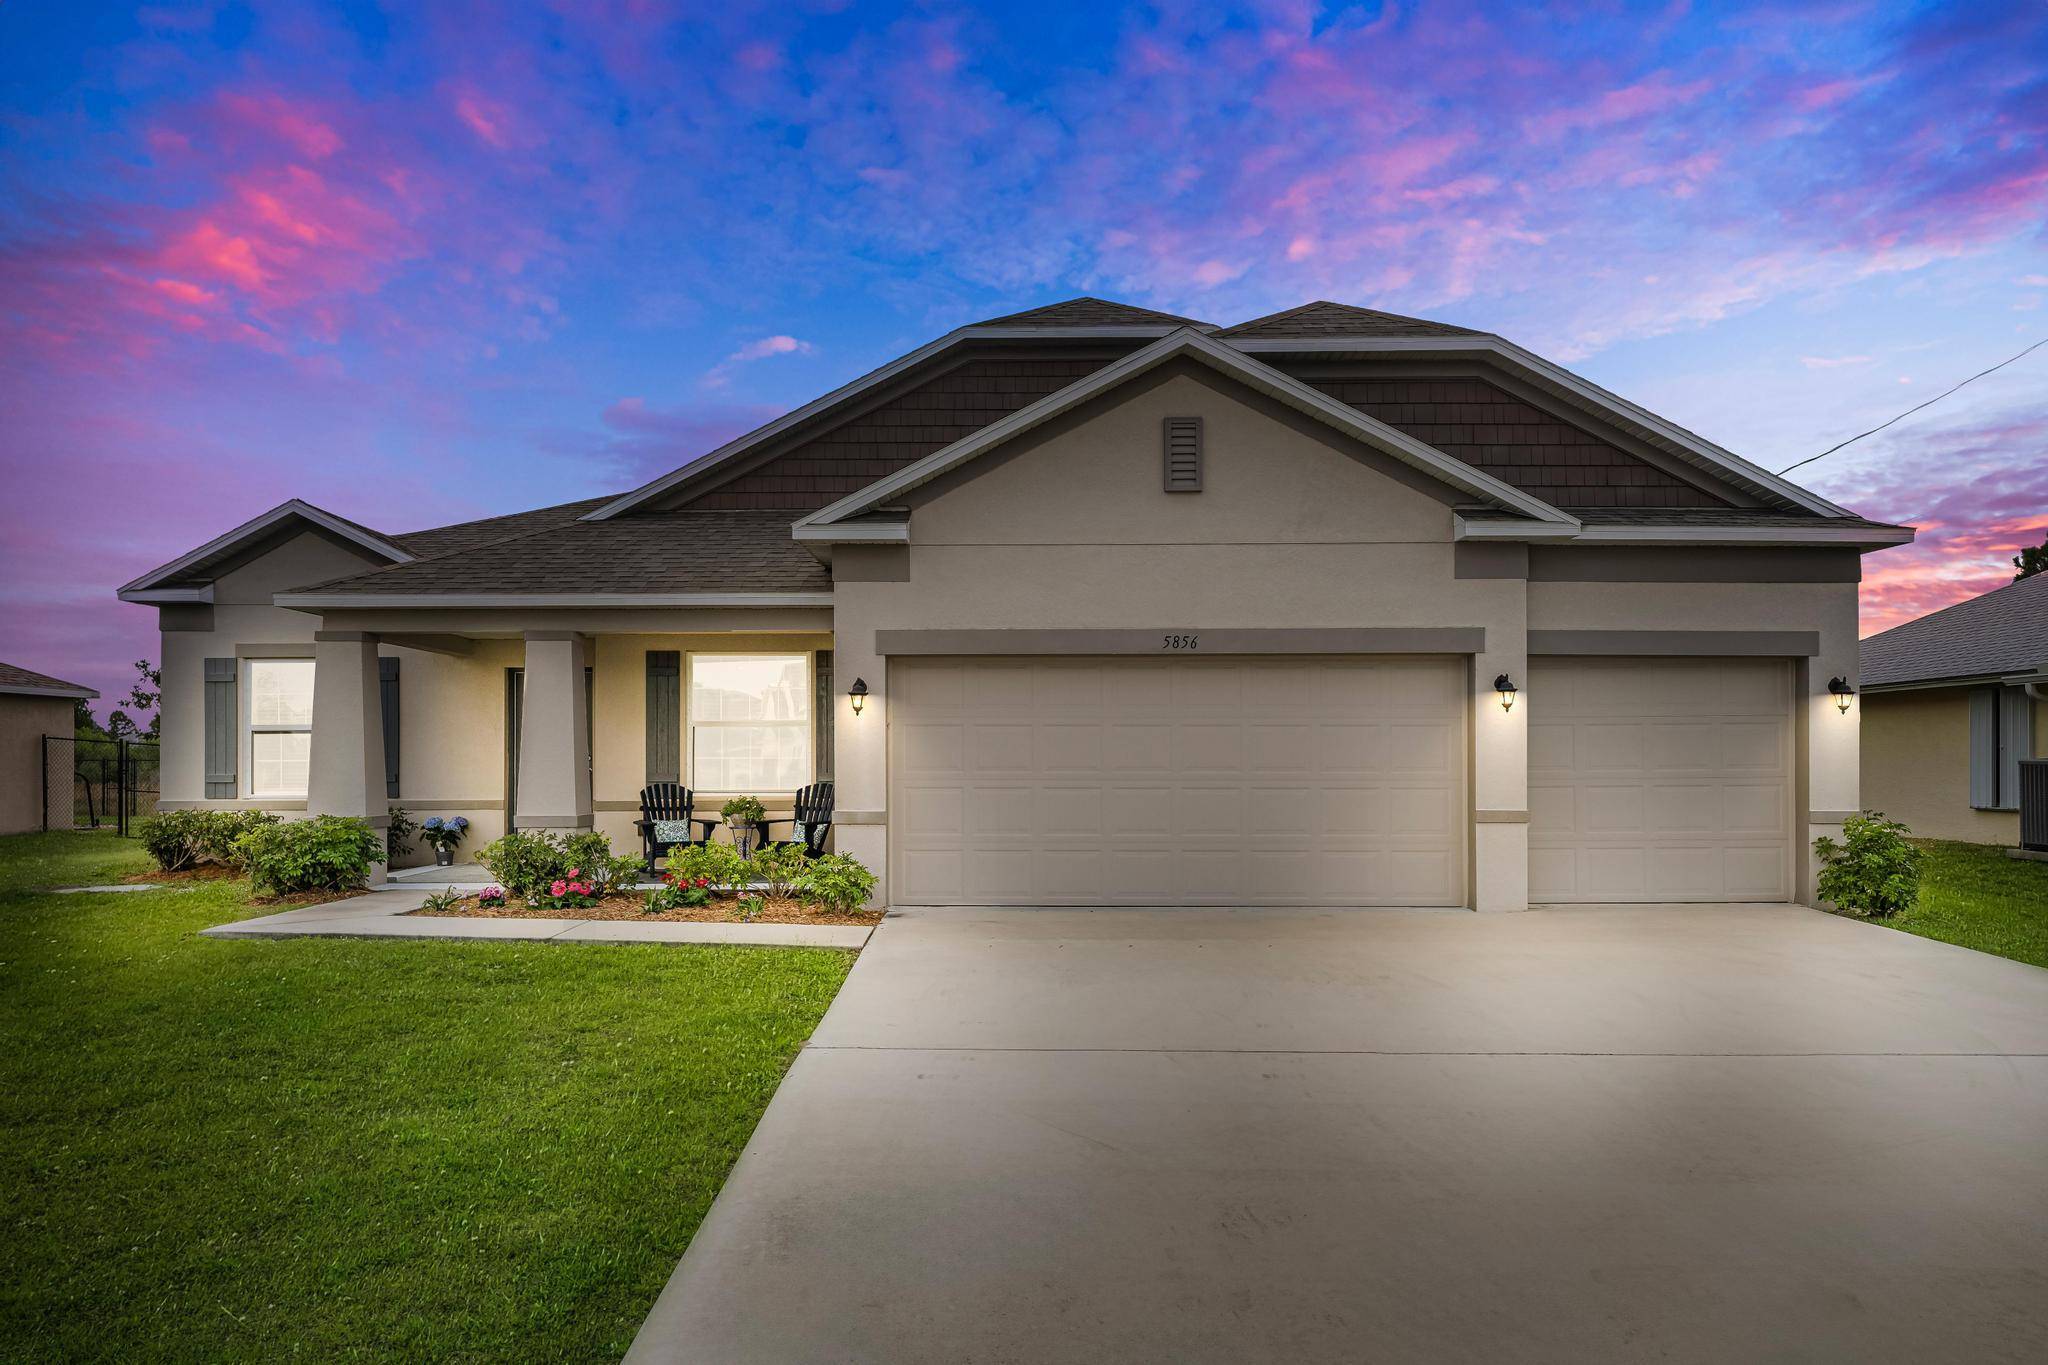 Welcome to this stunning Maronda Sierra Model Home nestled in the Torino area of Port St.